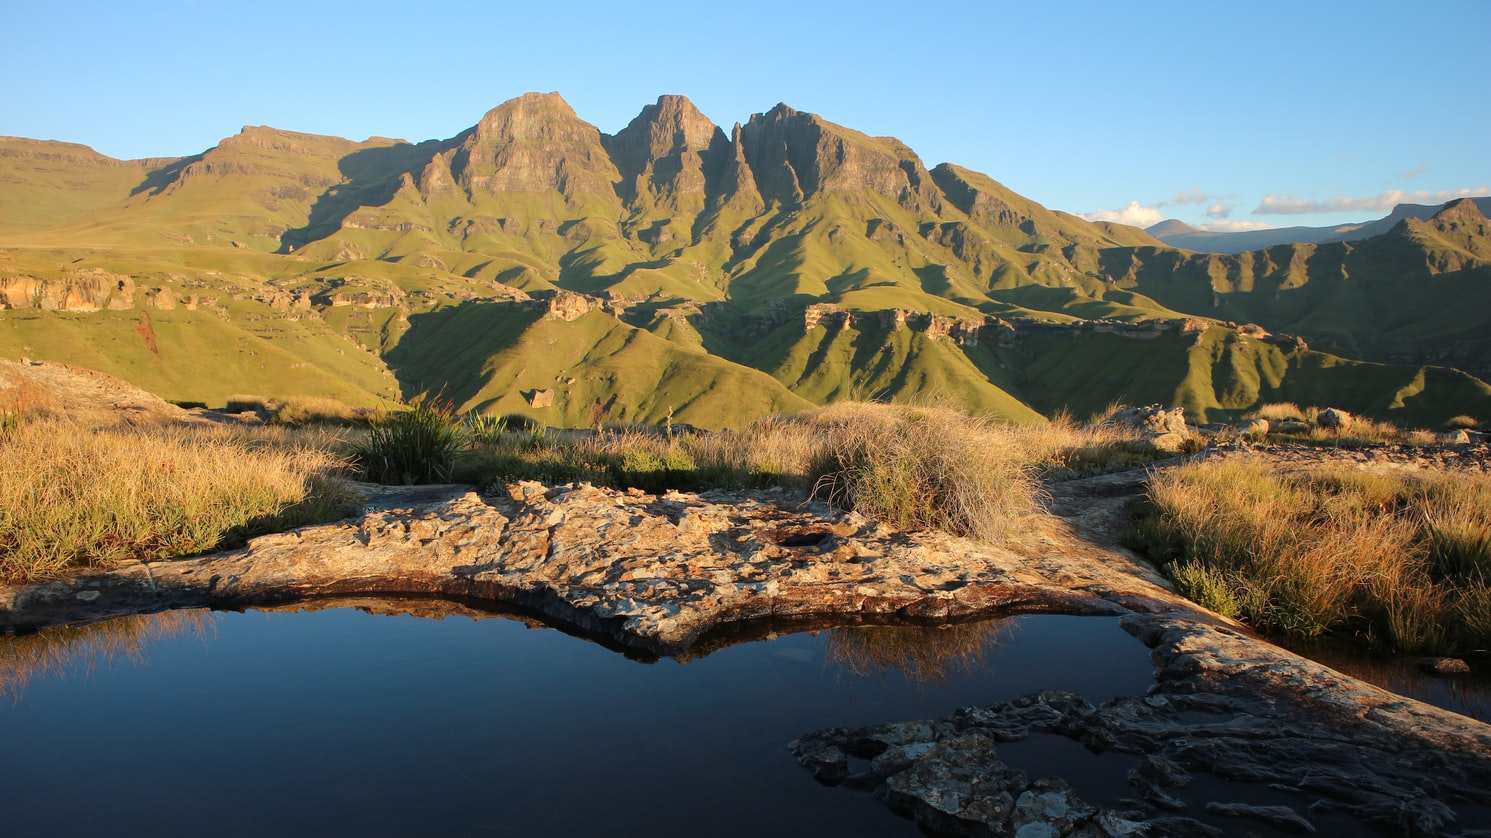 A Guide To The 10 UNESCO World Heritage Sites In South Africa